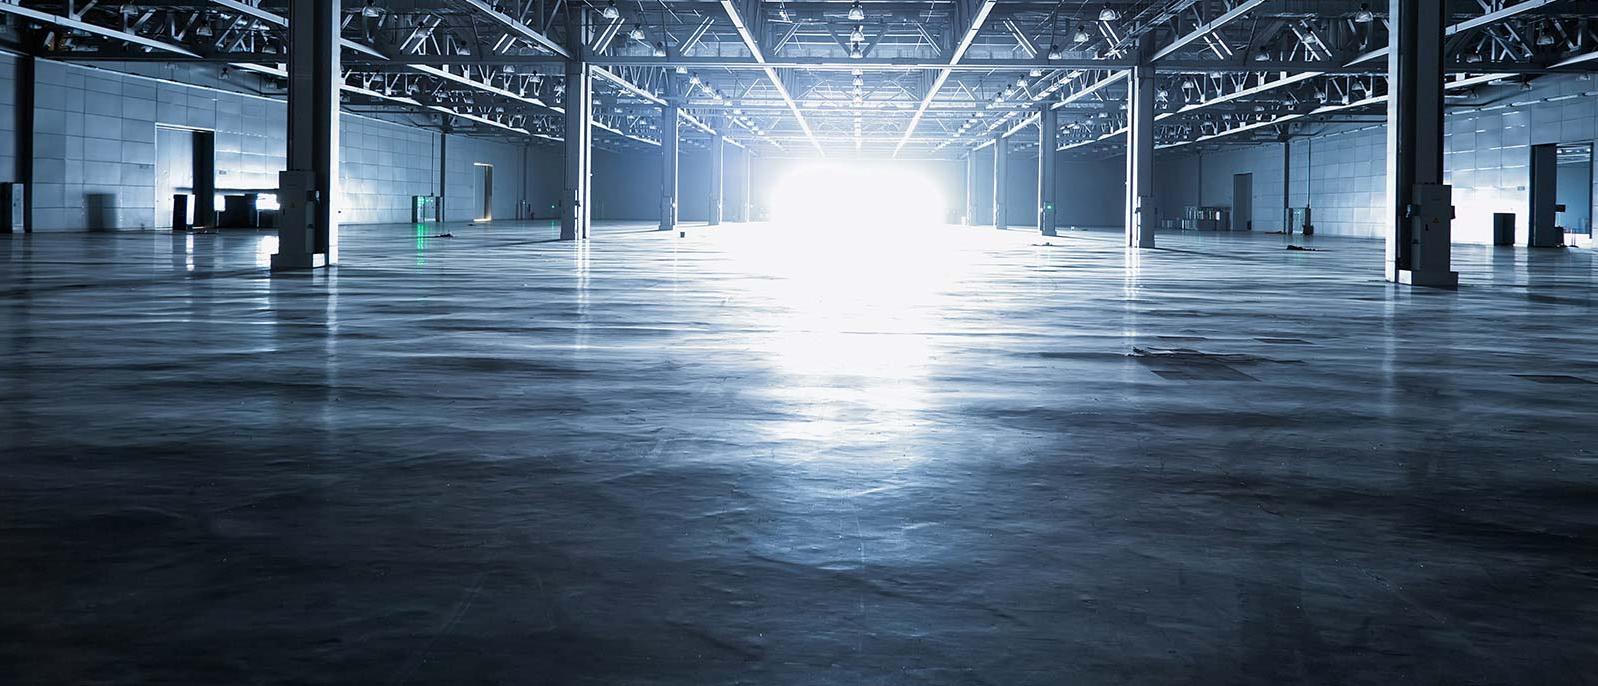 Background Image | Open Industrial Warehouse